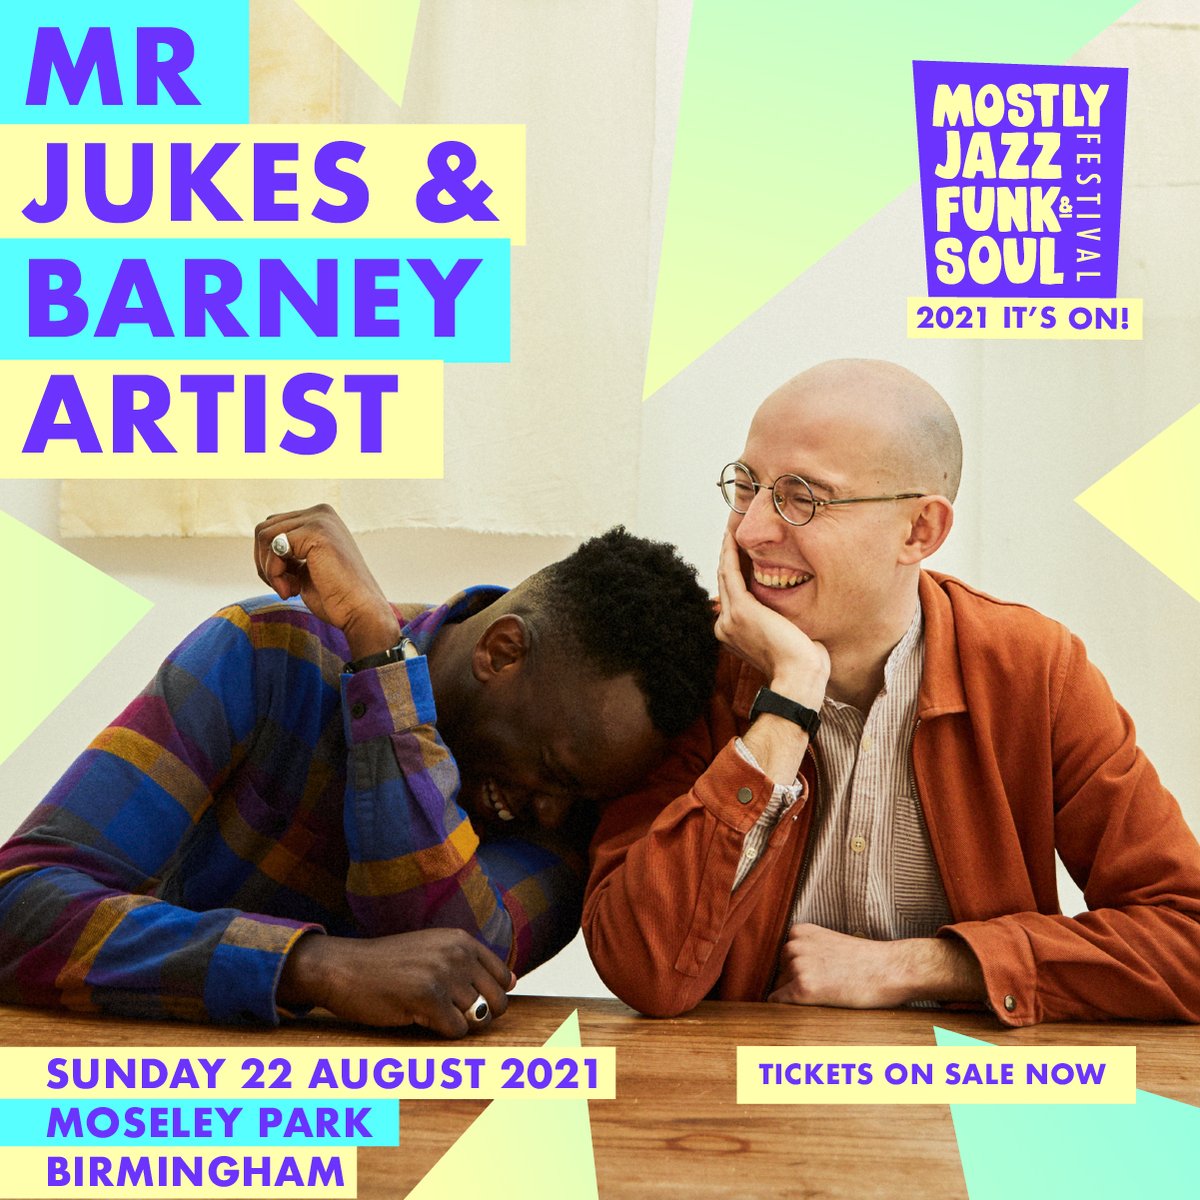 ✨ HAPPY RELEASE DAY TO 2021 ACT @mrjukesmusic & @barneyartist ✨ Big congratulations to these Sunday night headliners, who have just released their brand new album 'The Locket'. We can't wait to hear it live! Limited tickets available now: mostlyjazz.co.uk